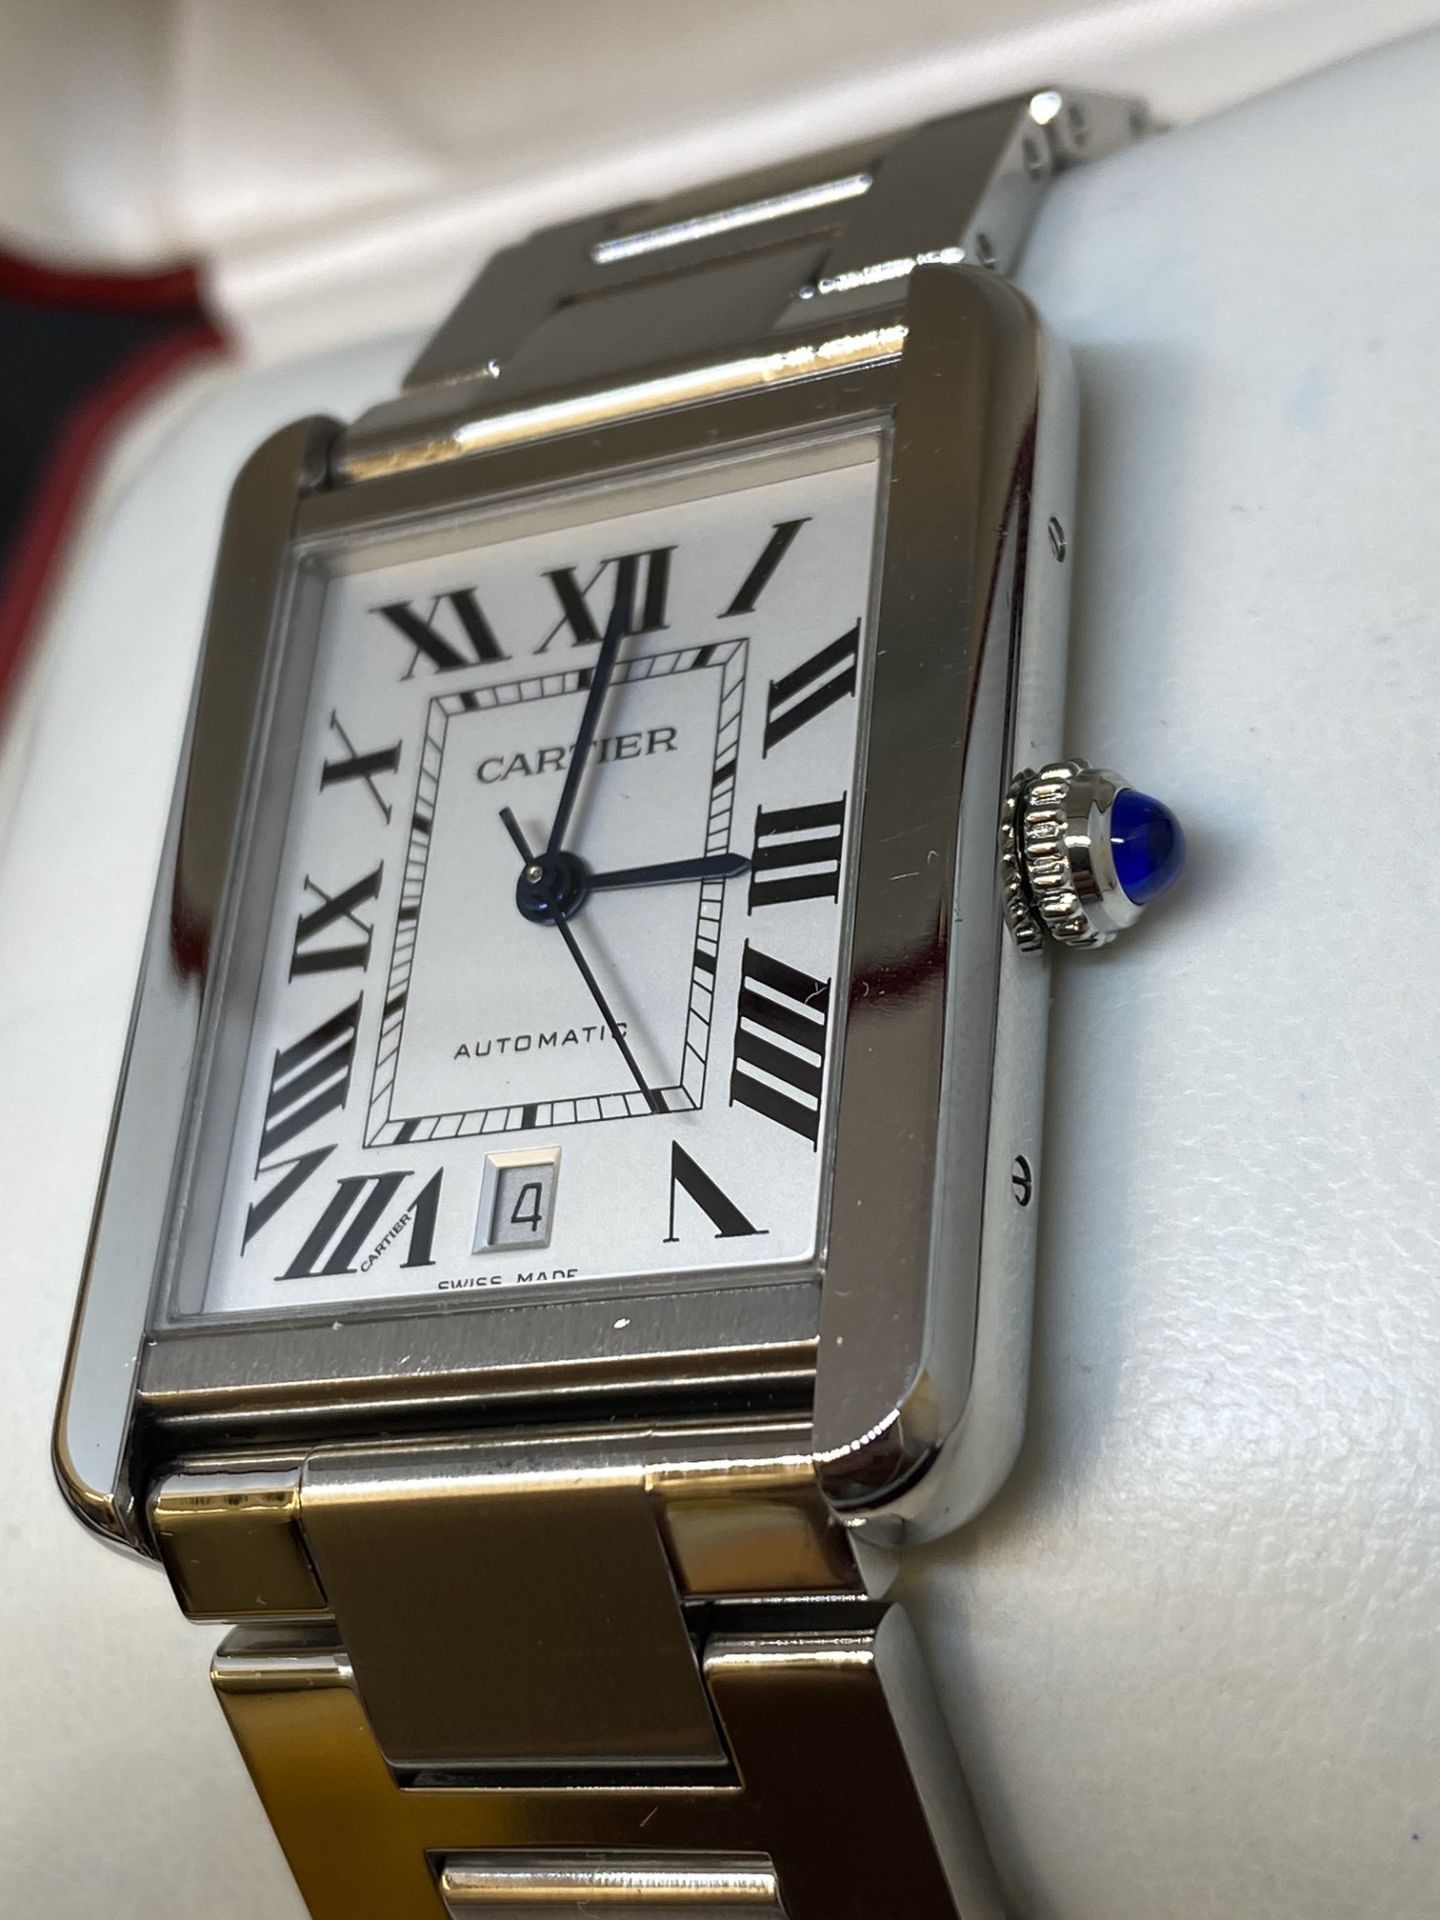 EXTRA LARGE CARTIER STAINLESS STEEL AUTOMATIC WATCH WITH BOX - Image 5 of 9